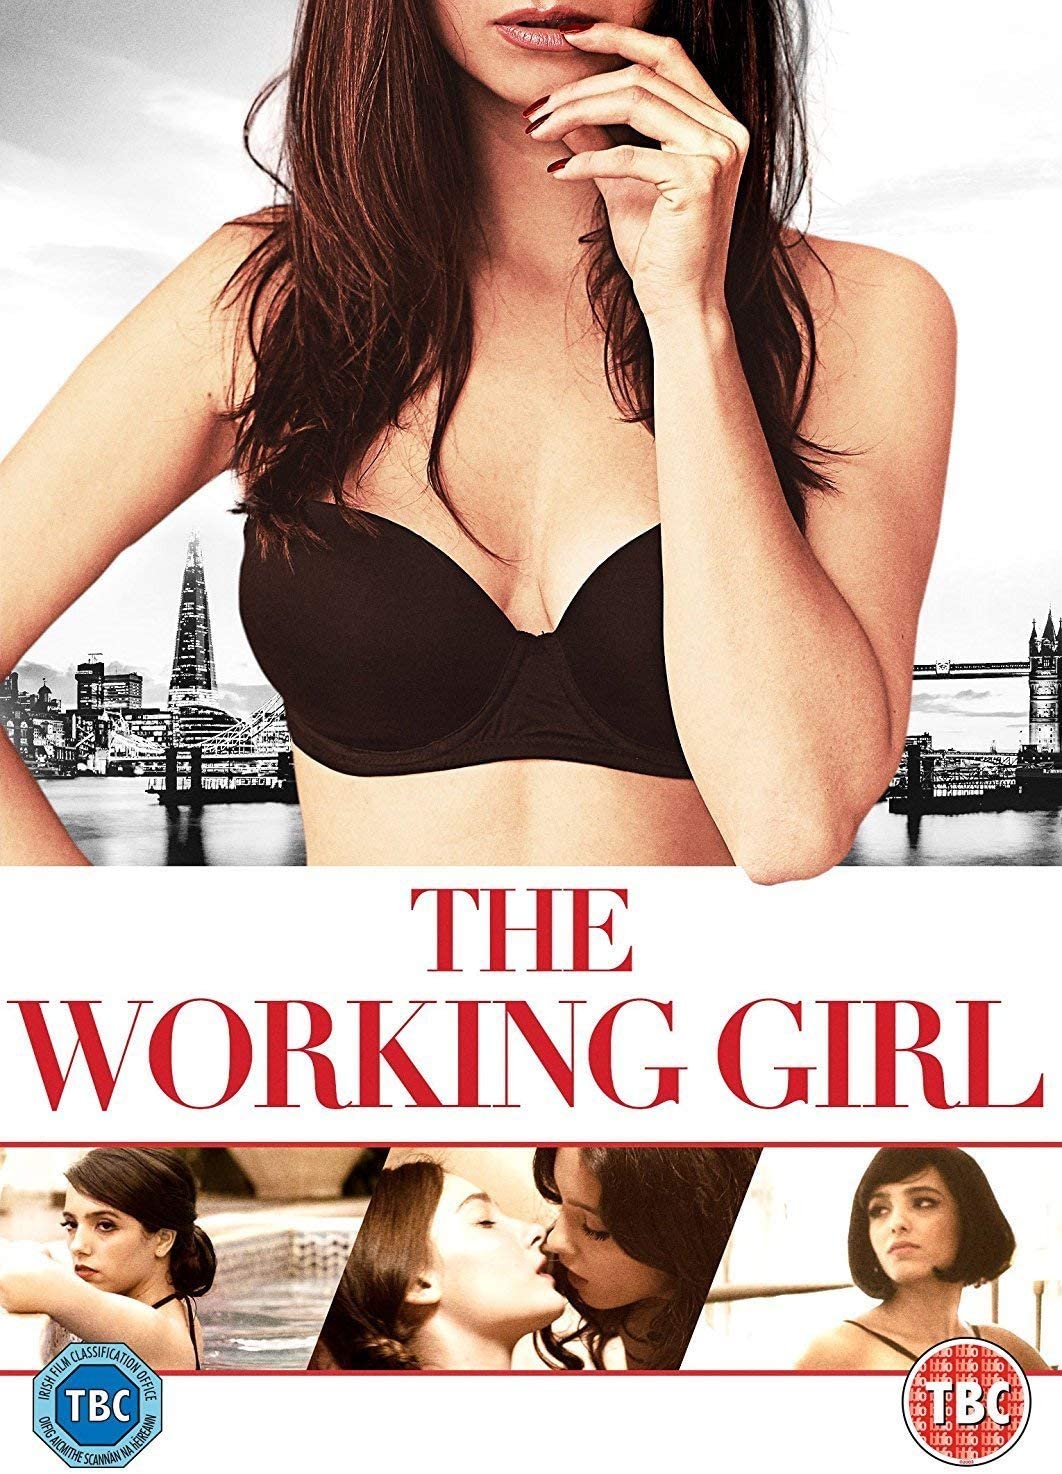 The Working Girl - Romance/Comedy [DVD]